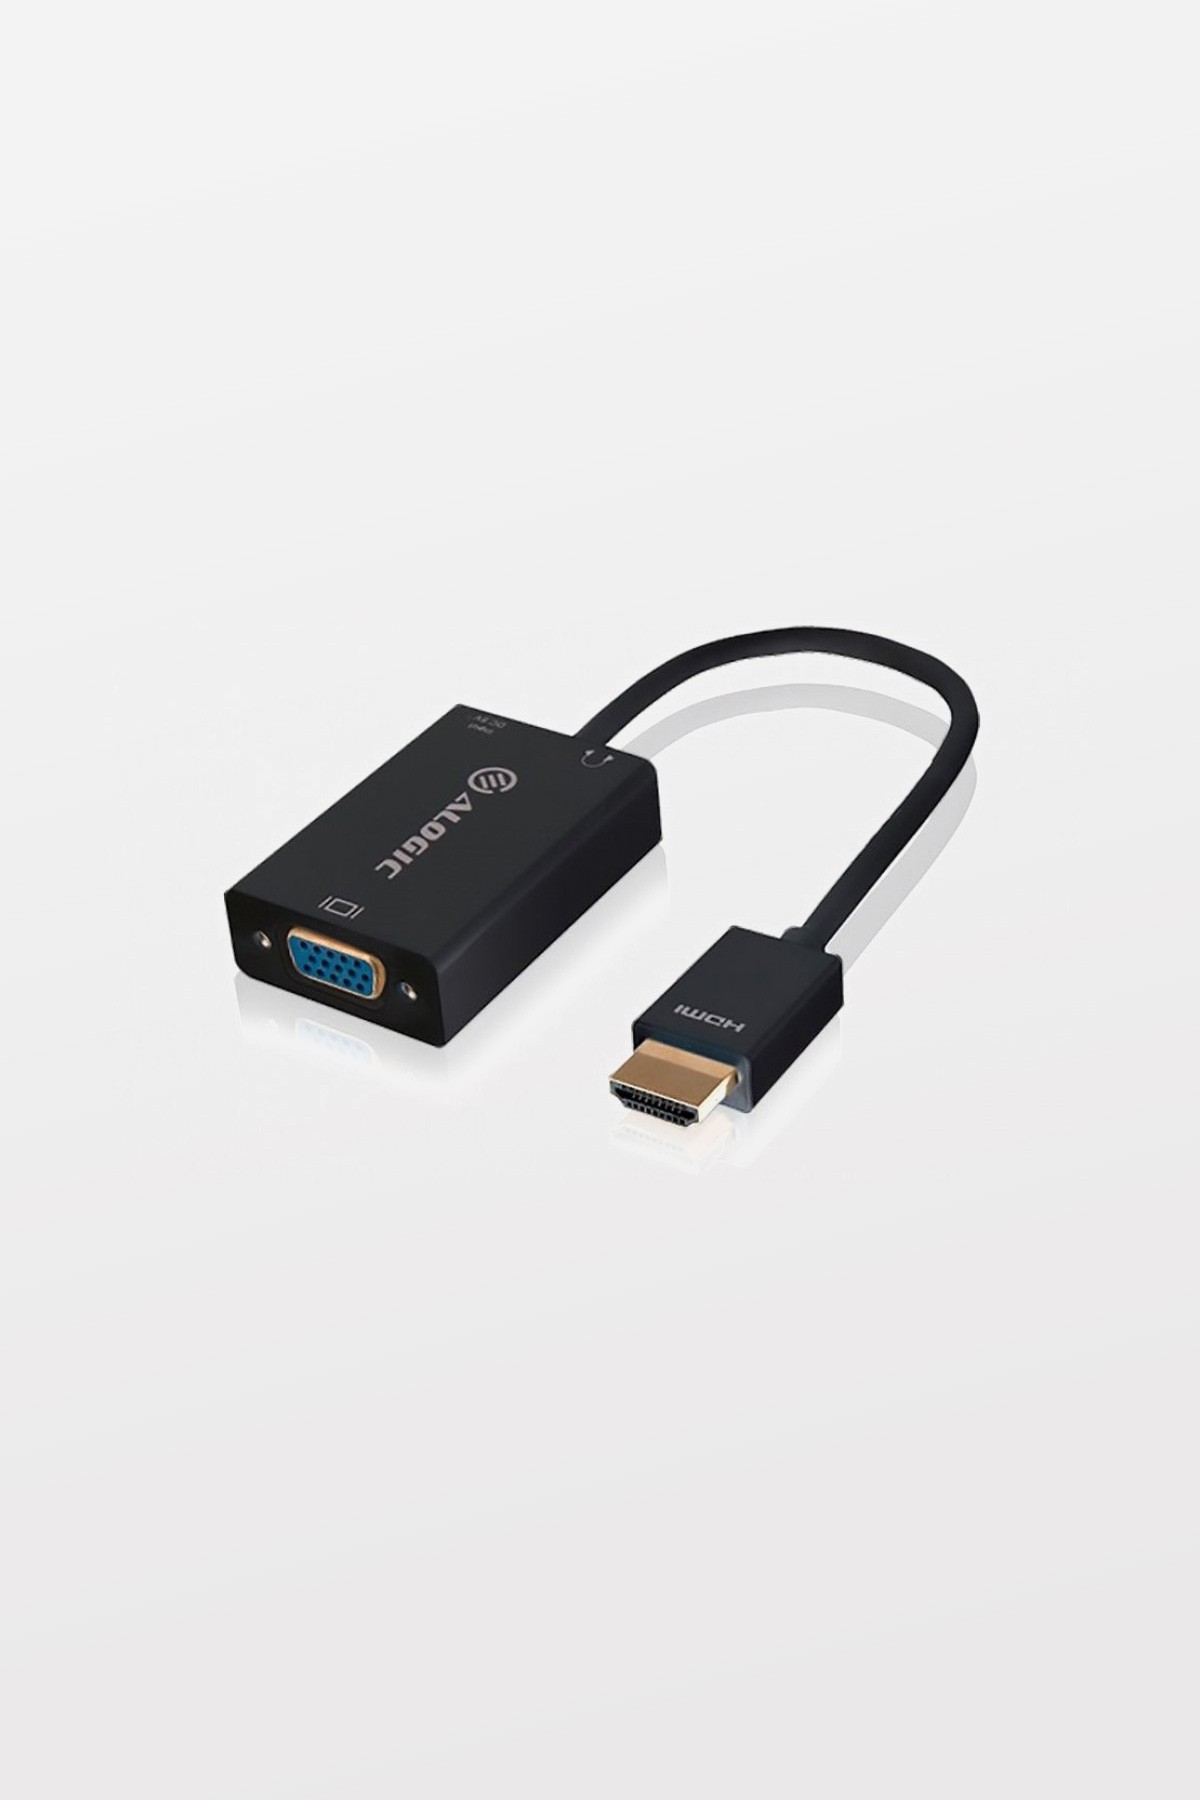 ALOGIC HDMI to VGA Adapter with 3.5mm Stereo Audio Output